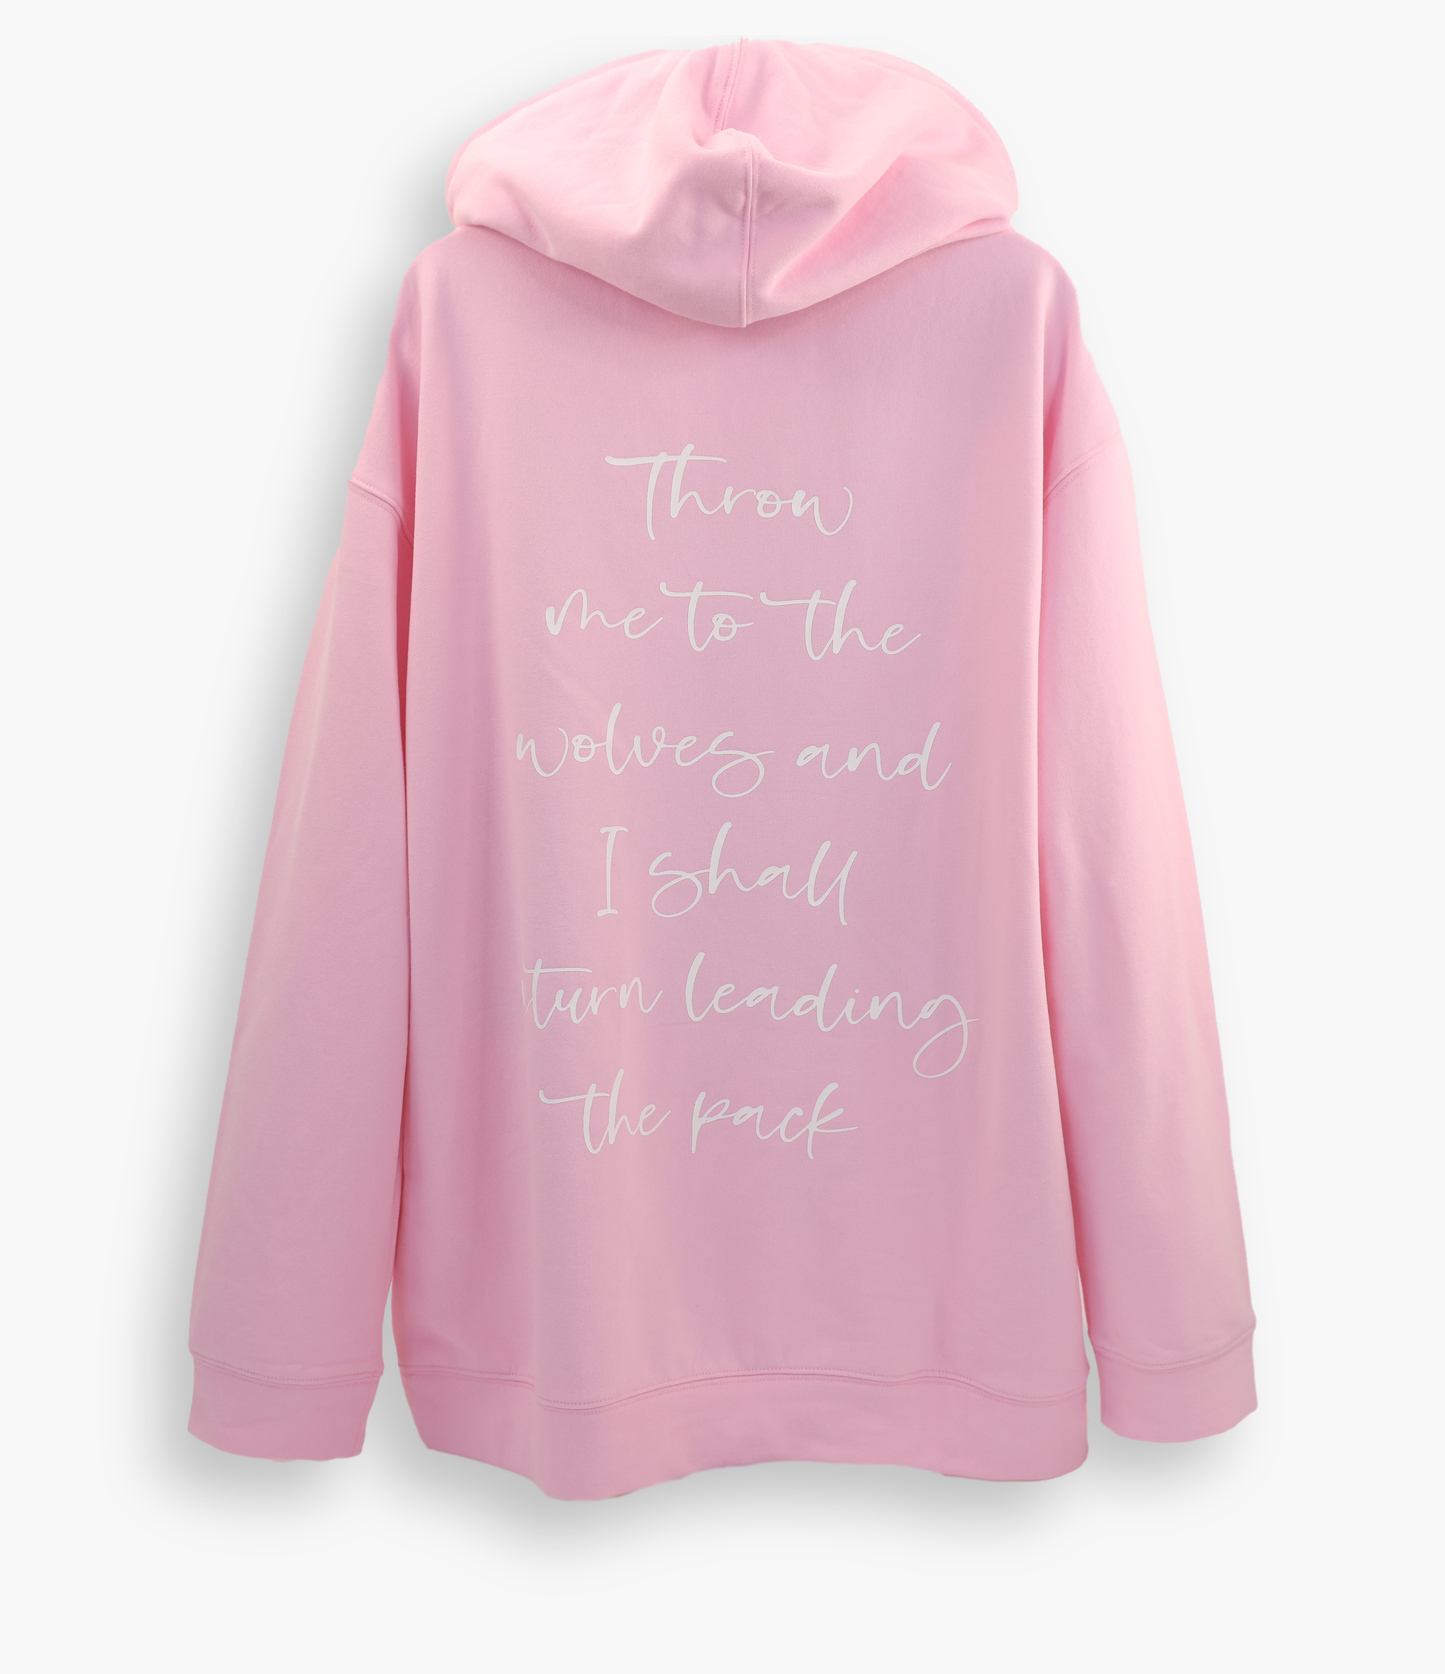 "Throw me to the Wolves" Hoodie with Crystal Drawstrings